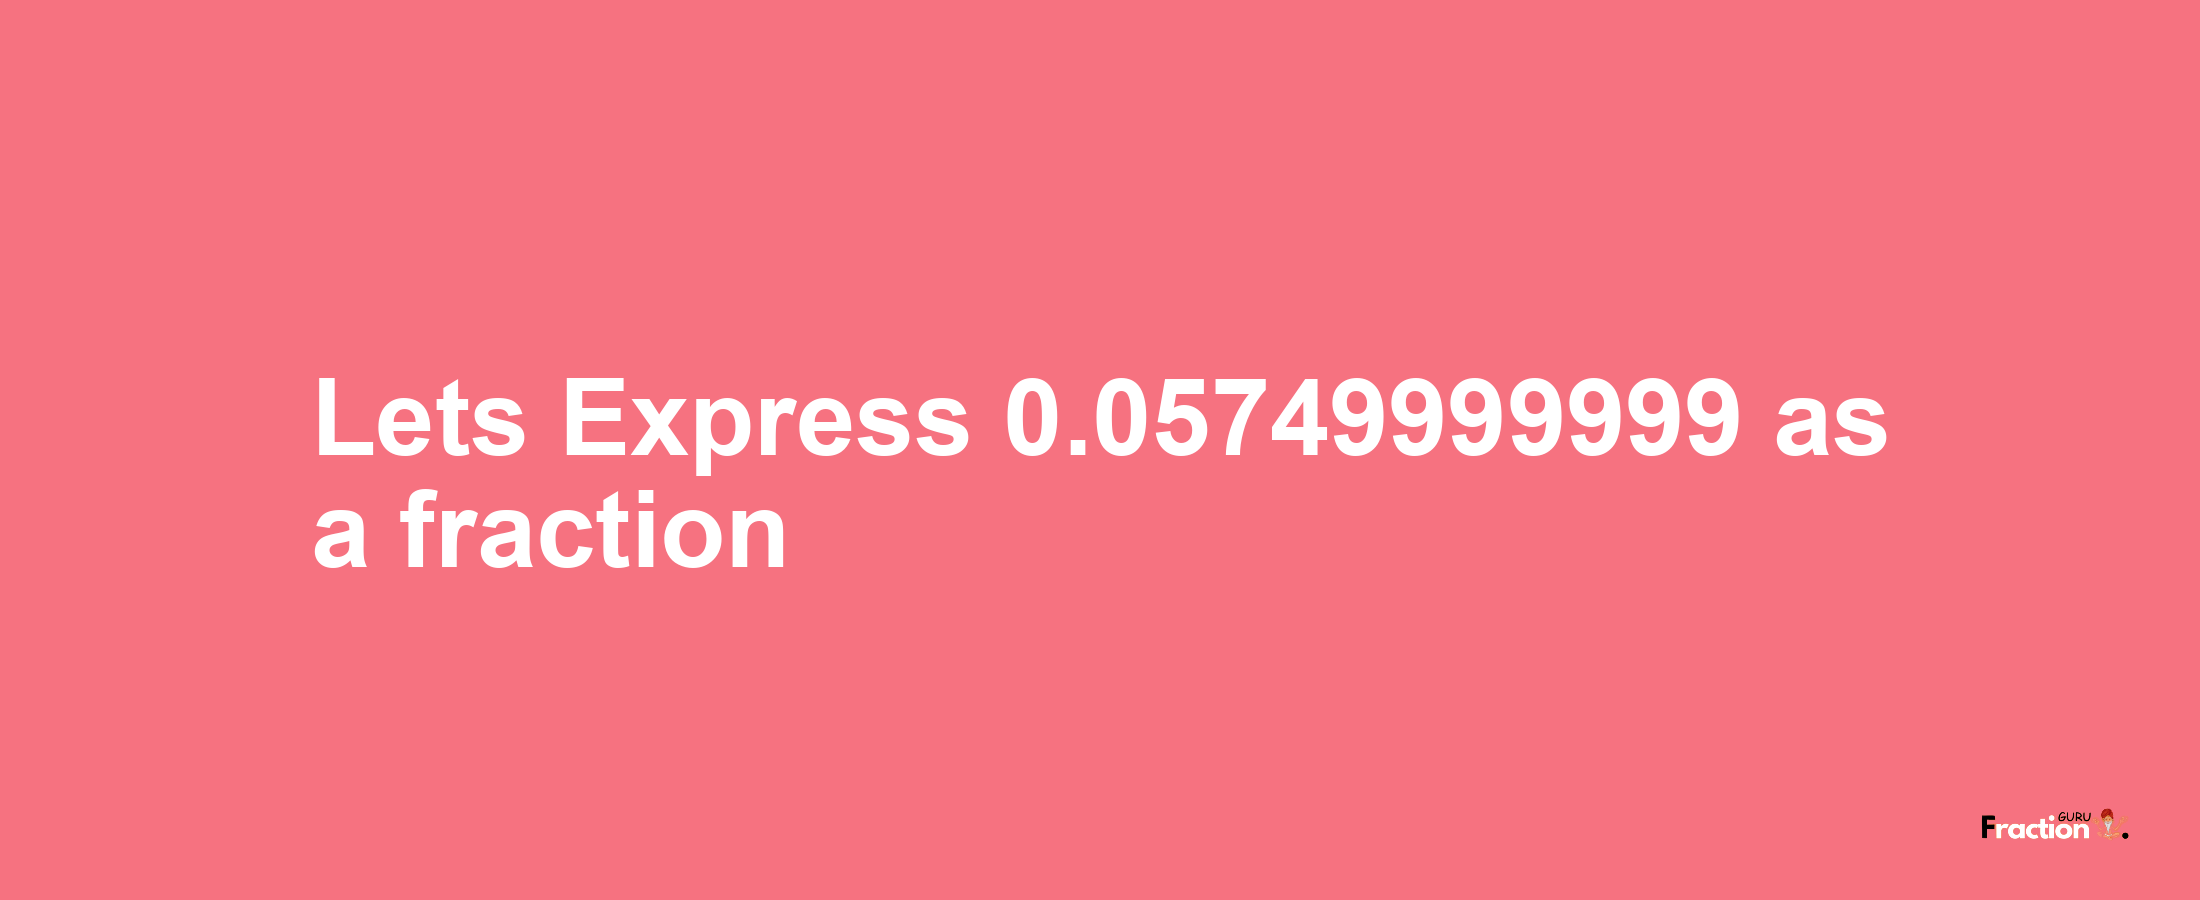 Lets Express 0.05749999999 as afraction